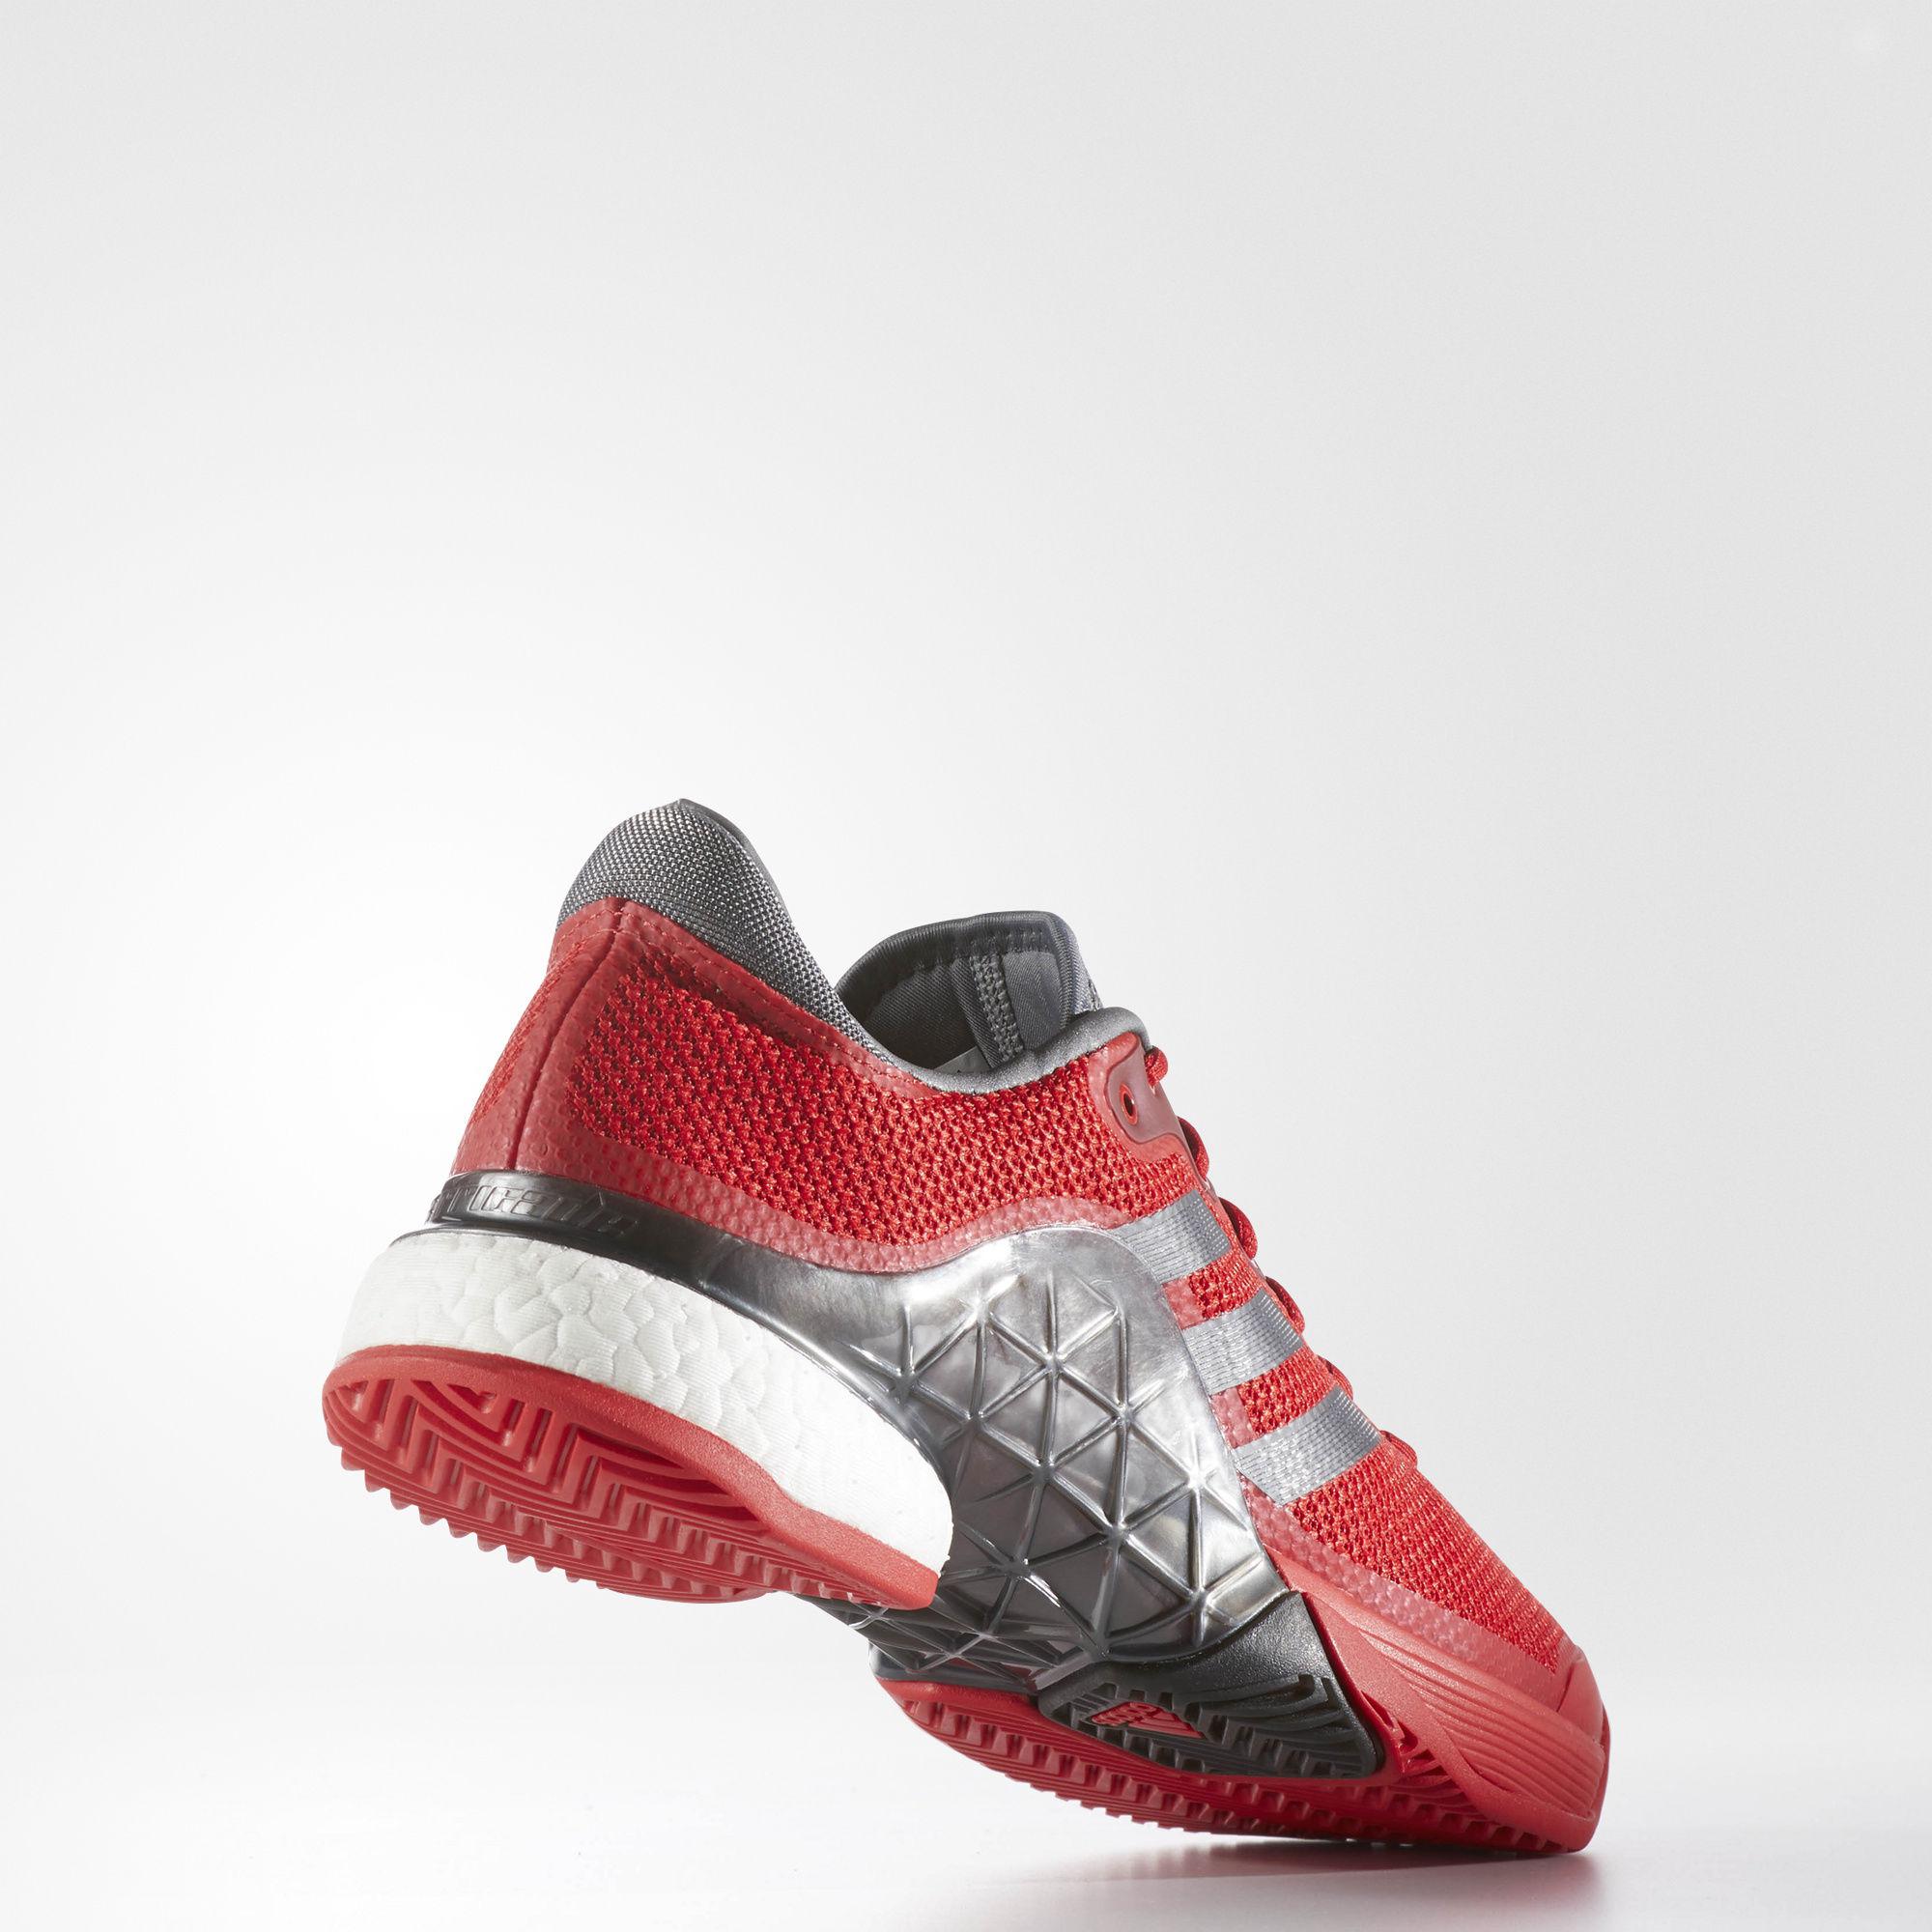 Adidas Mens Barricade Boost Tennis Shoes - Scarlet Red ...